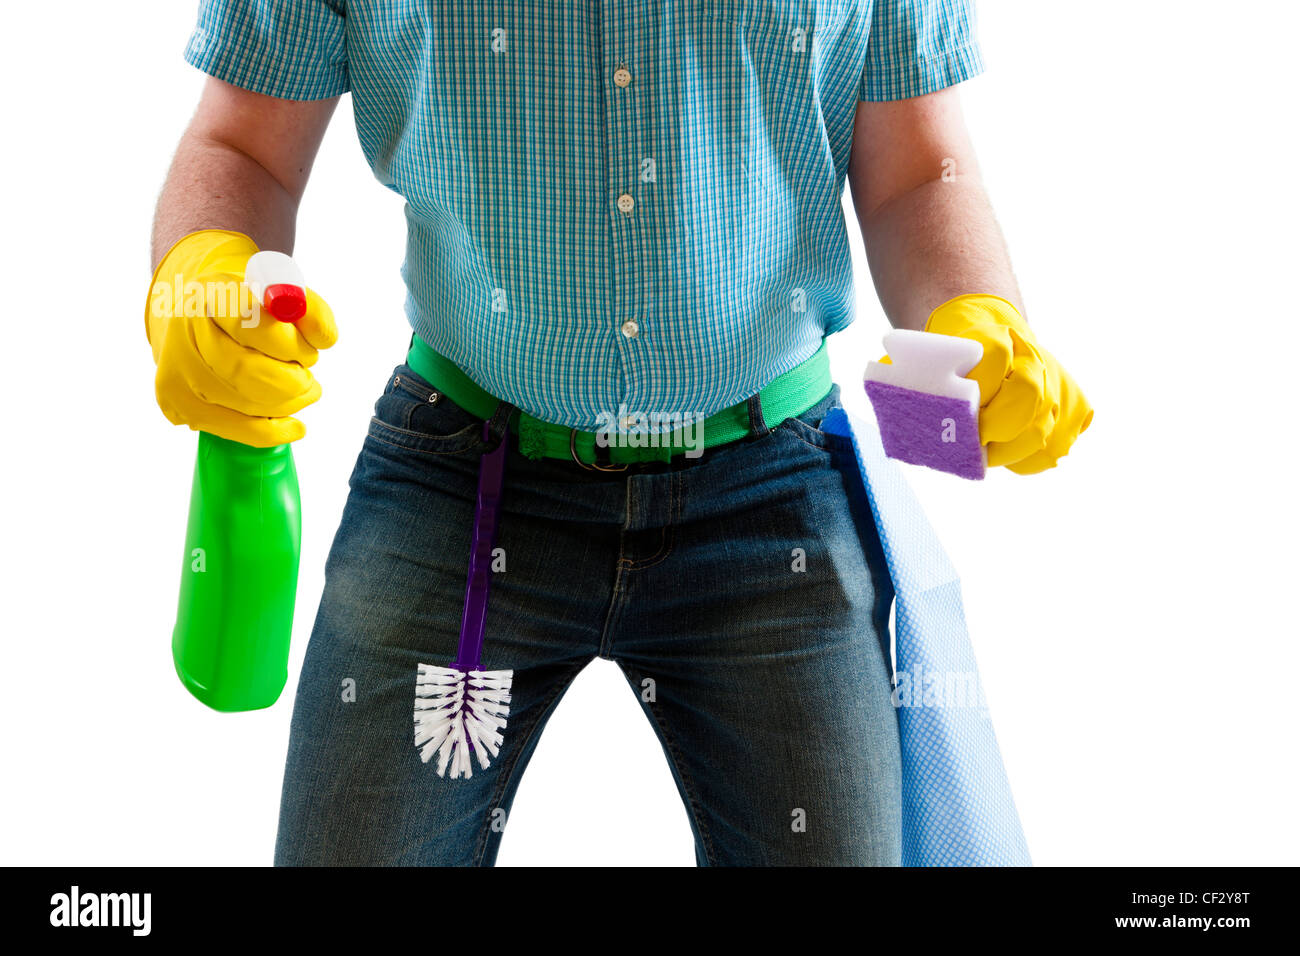 Housework concept. Young man with cleaning materials ready to start a Spring clean. Isolated on a white background. Stock Photo